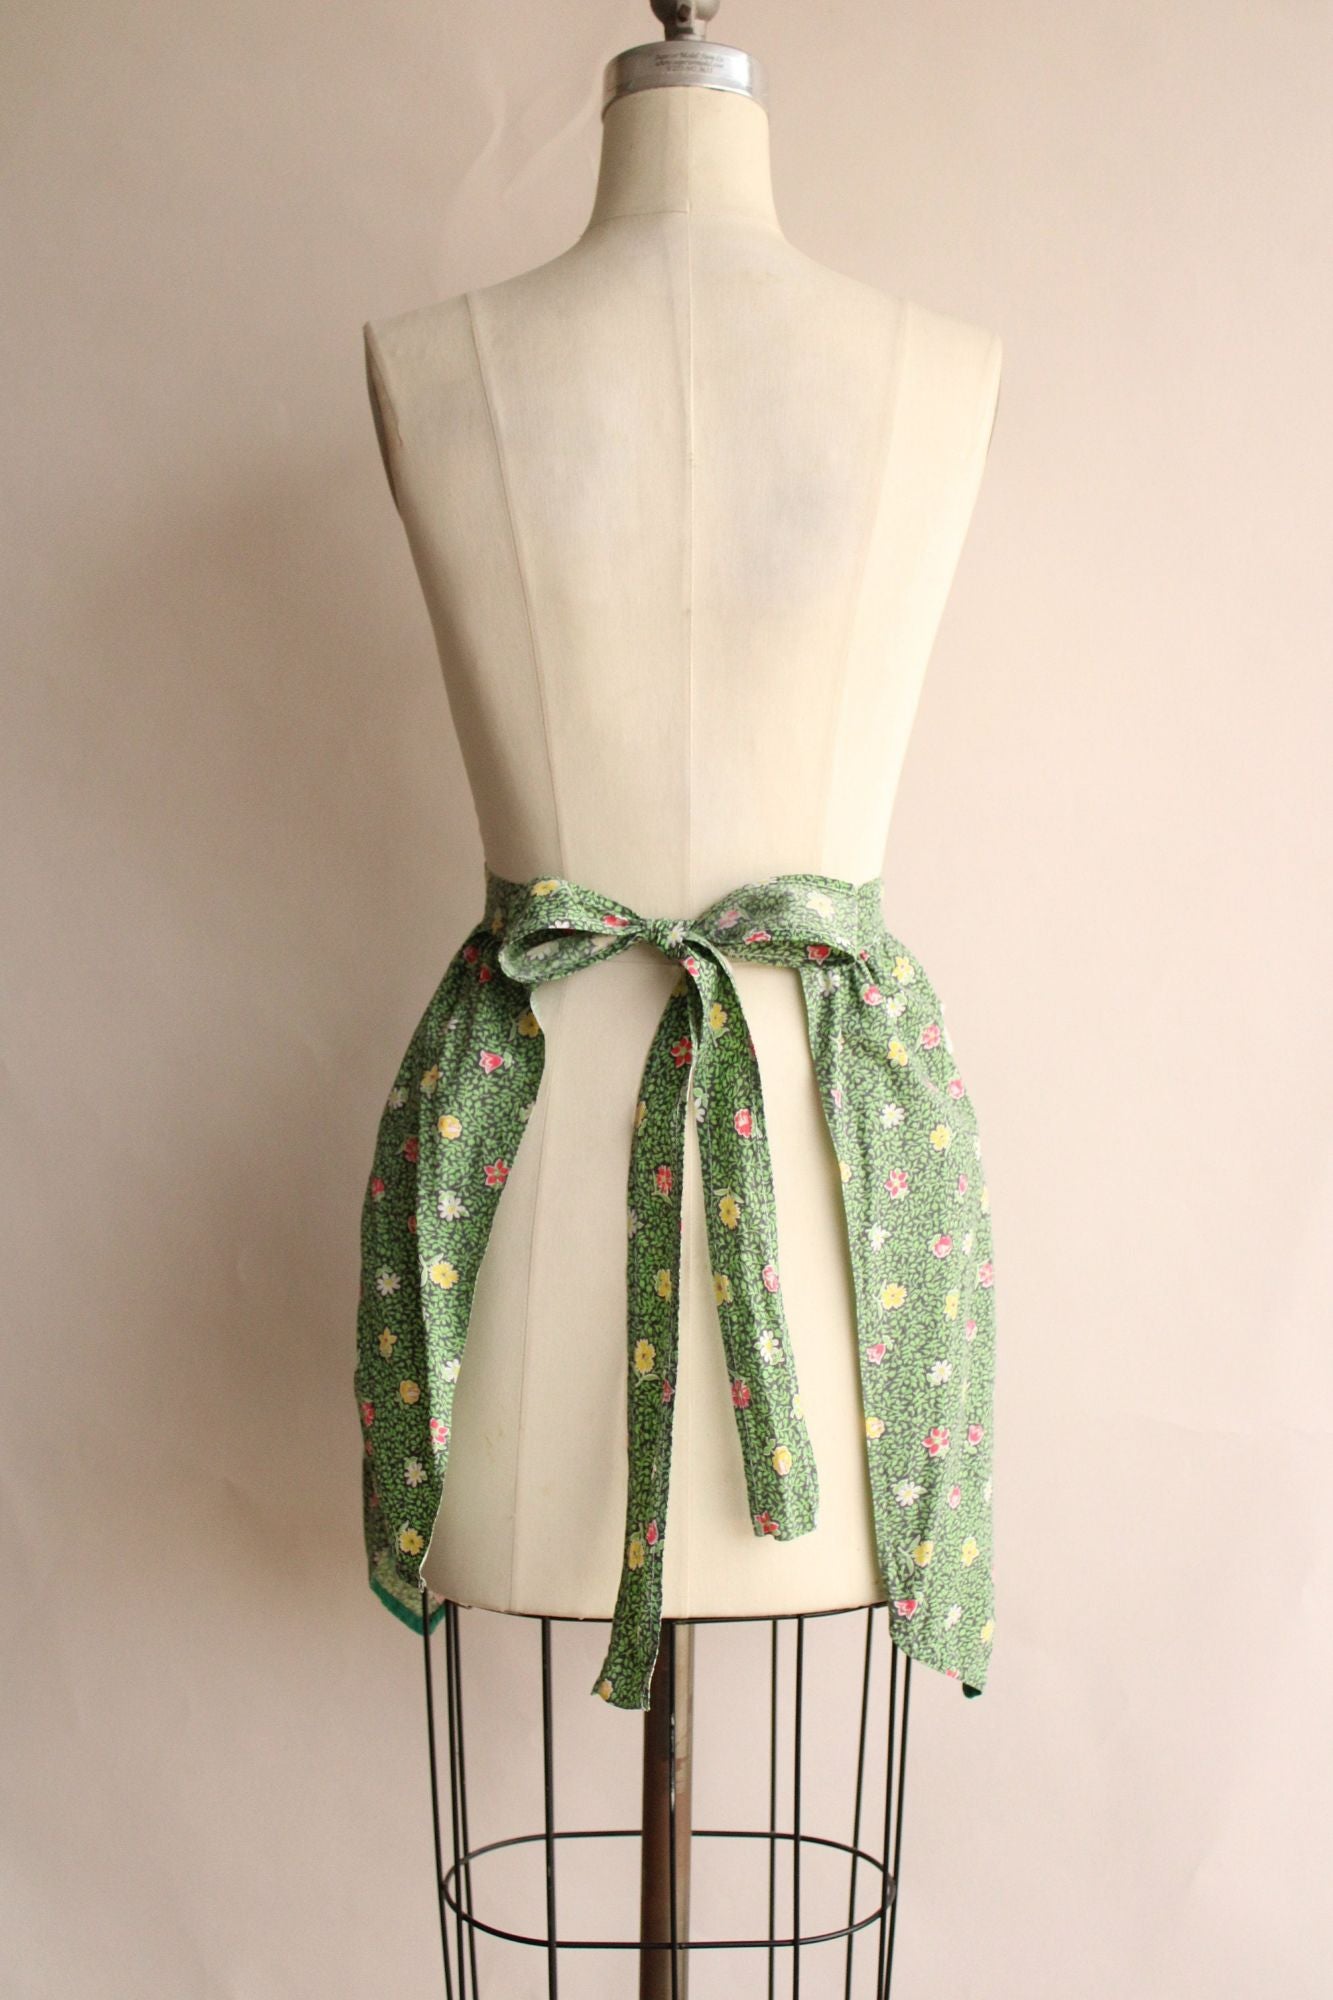 Vintage 1950s Apron with Pocket and Eyelet Lace Trim